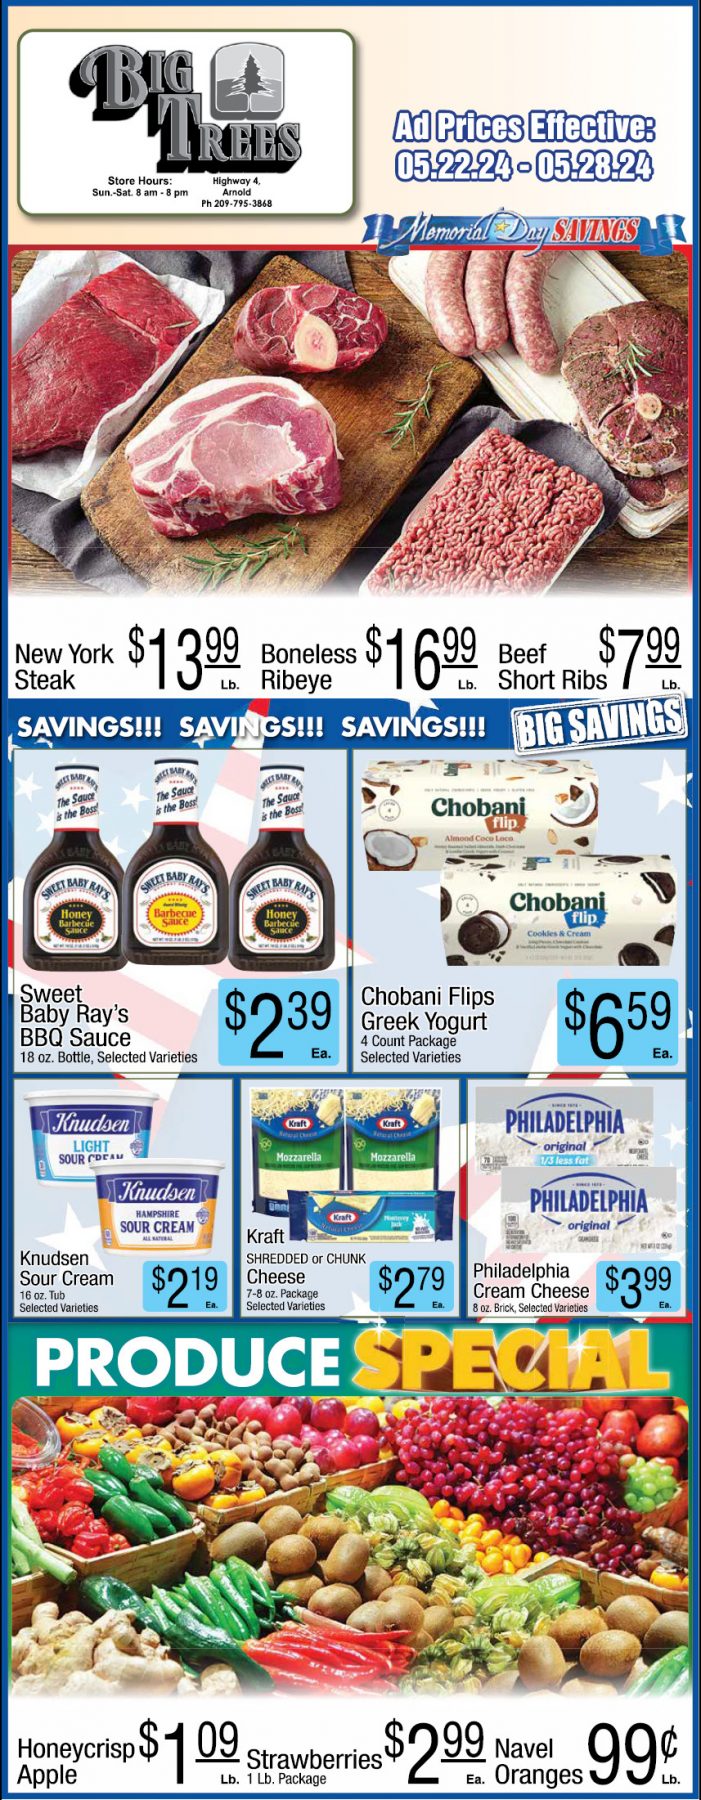 Big Trees Market Weekly Ad, Grocery, Produce, Meat & Deli Specials Through May 28! Shop Local & Save!